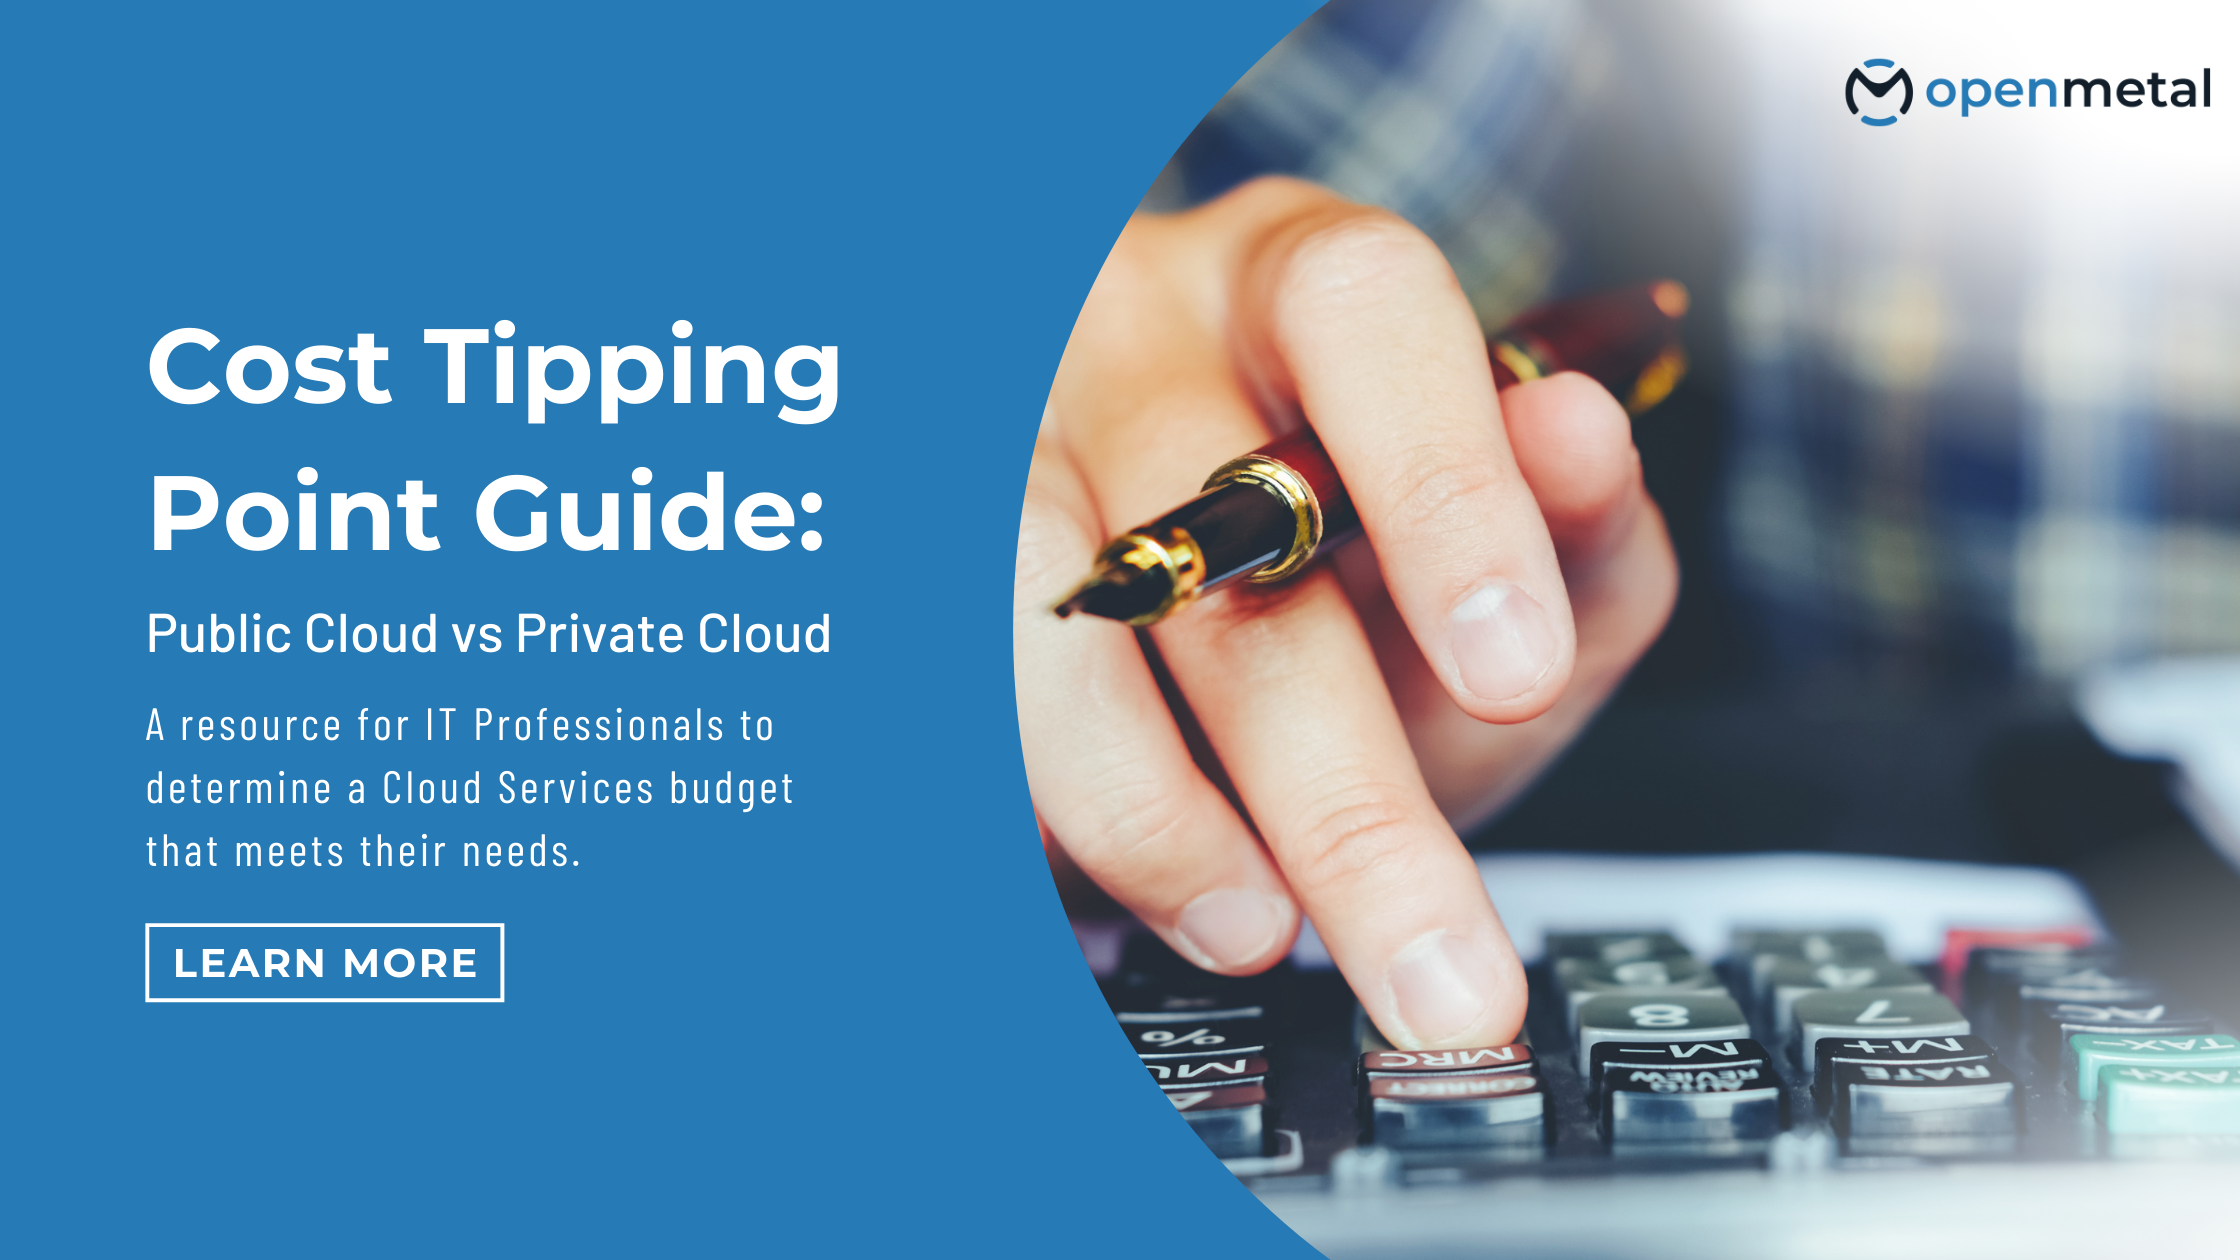 Public vs Private Cloud: A Cost Tipping Point Guide for IT Professionals